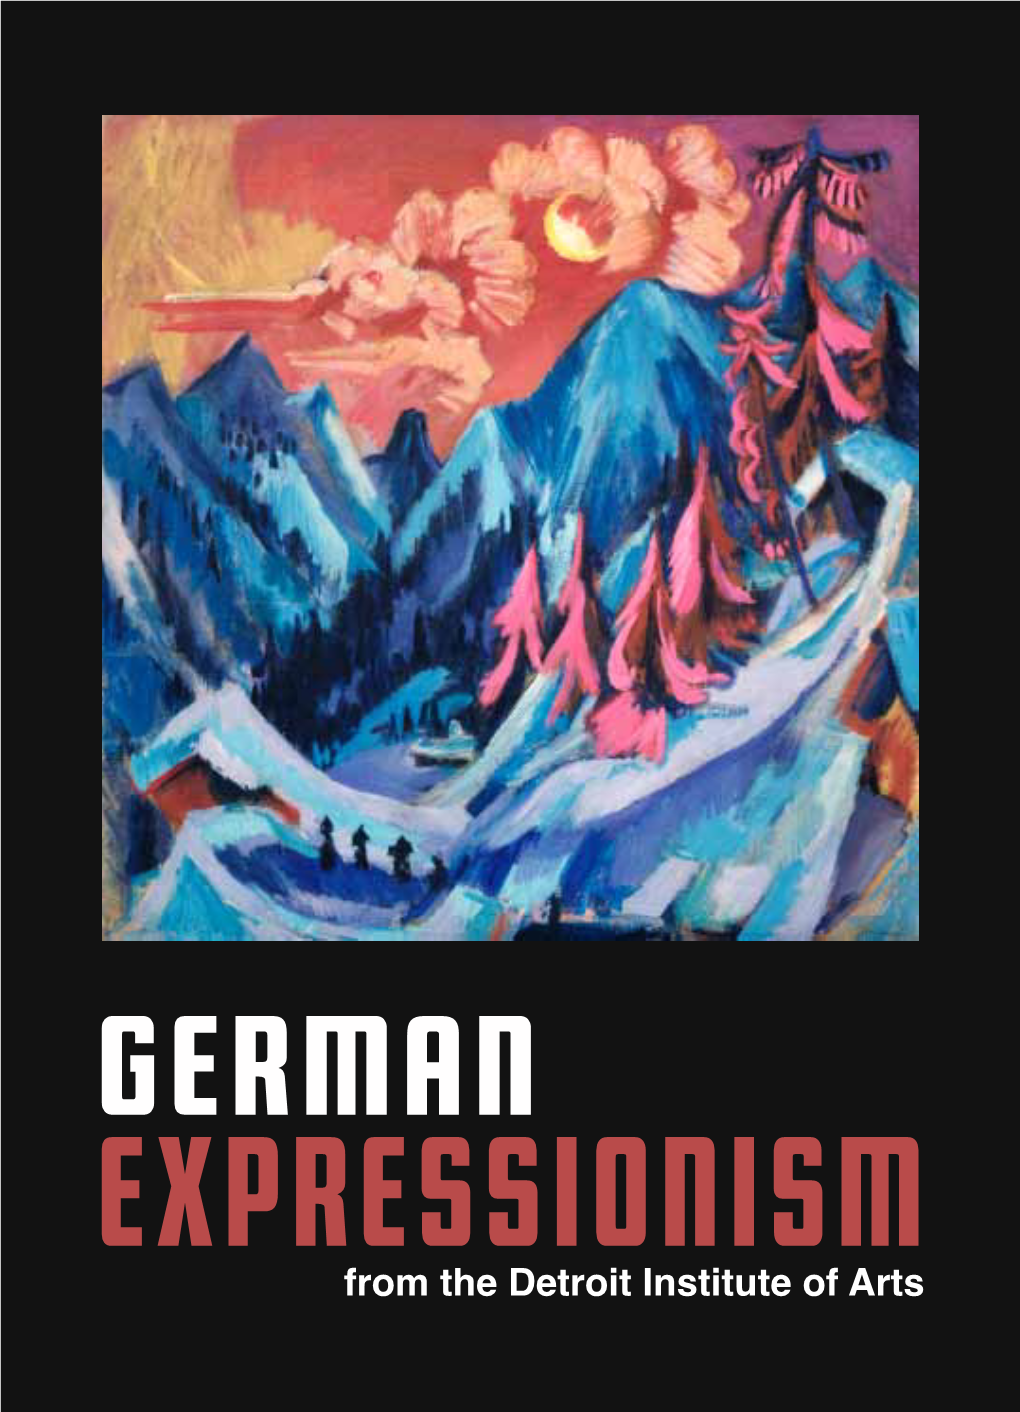 Gallery Guide German Expressionism from the Detroit Institute of Arts